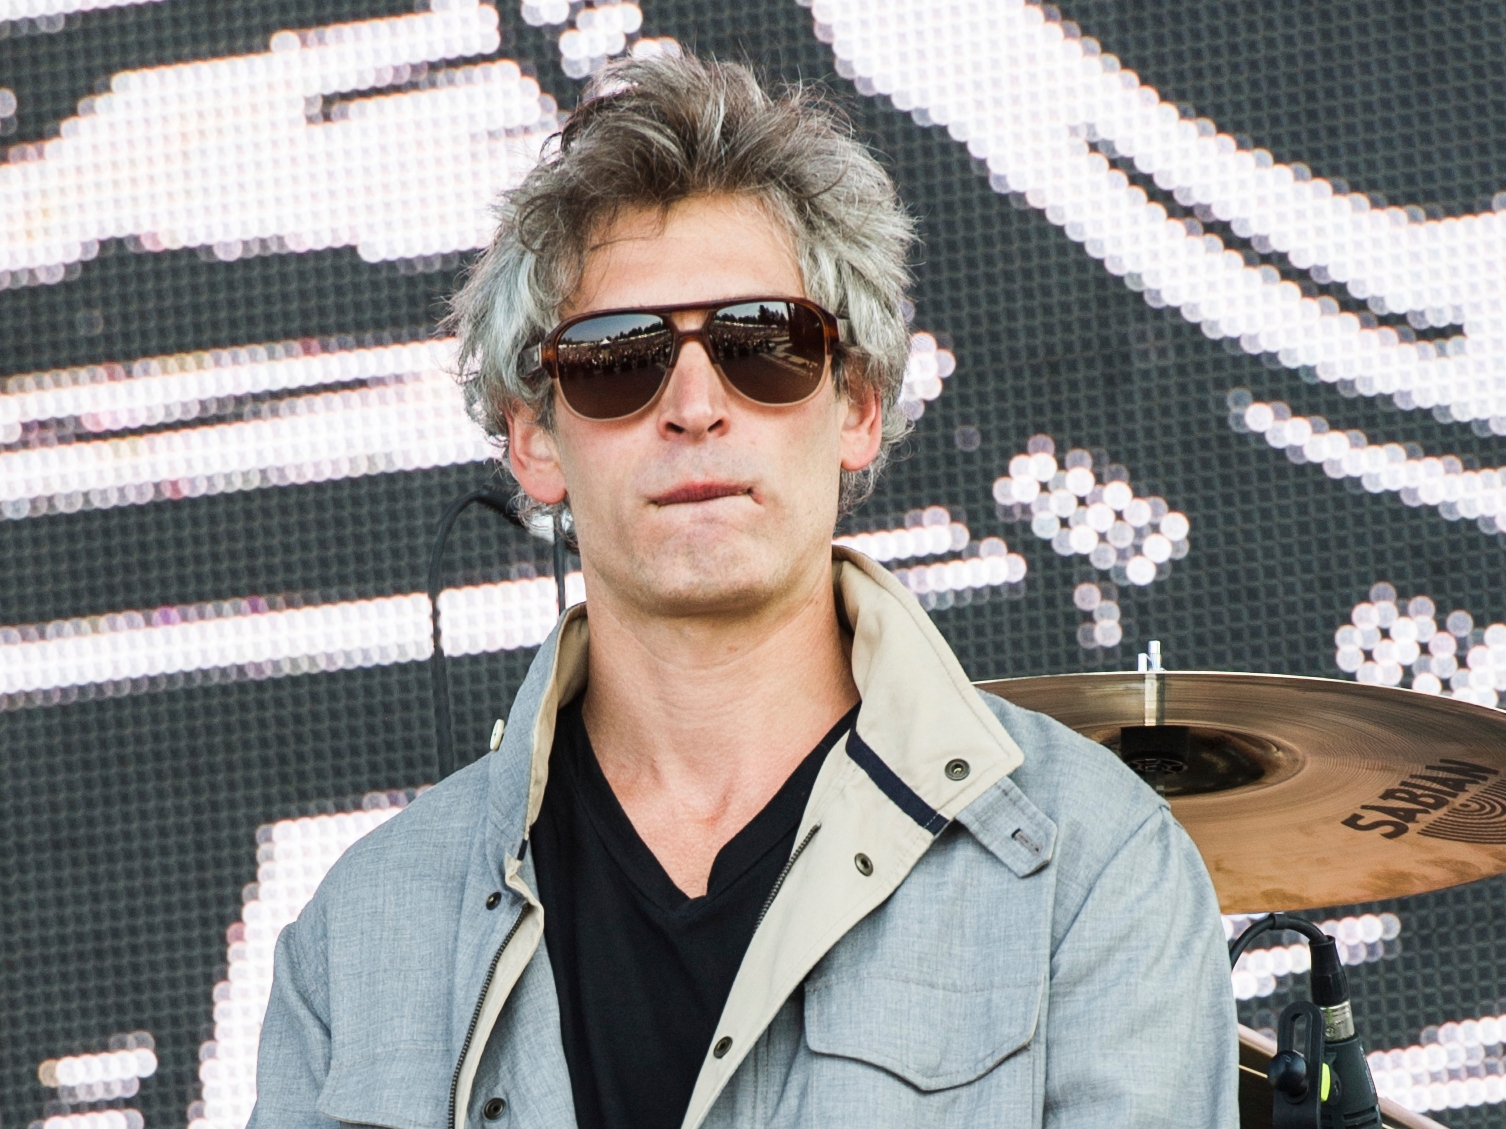 Matisyahu tour 2022 Where to buy tickets, schedule, dates, promo codes